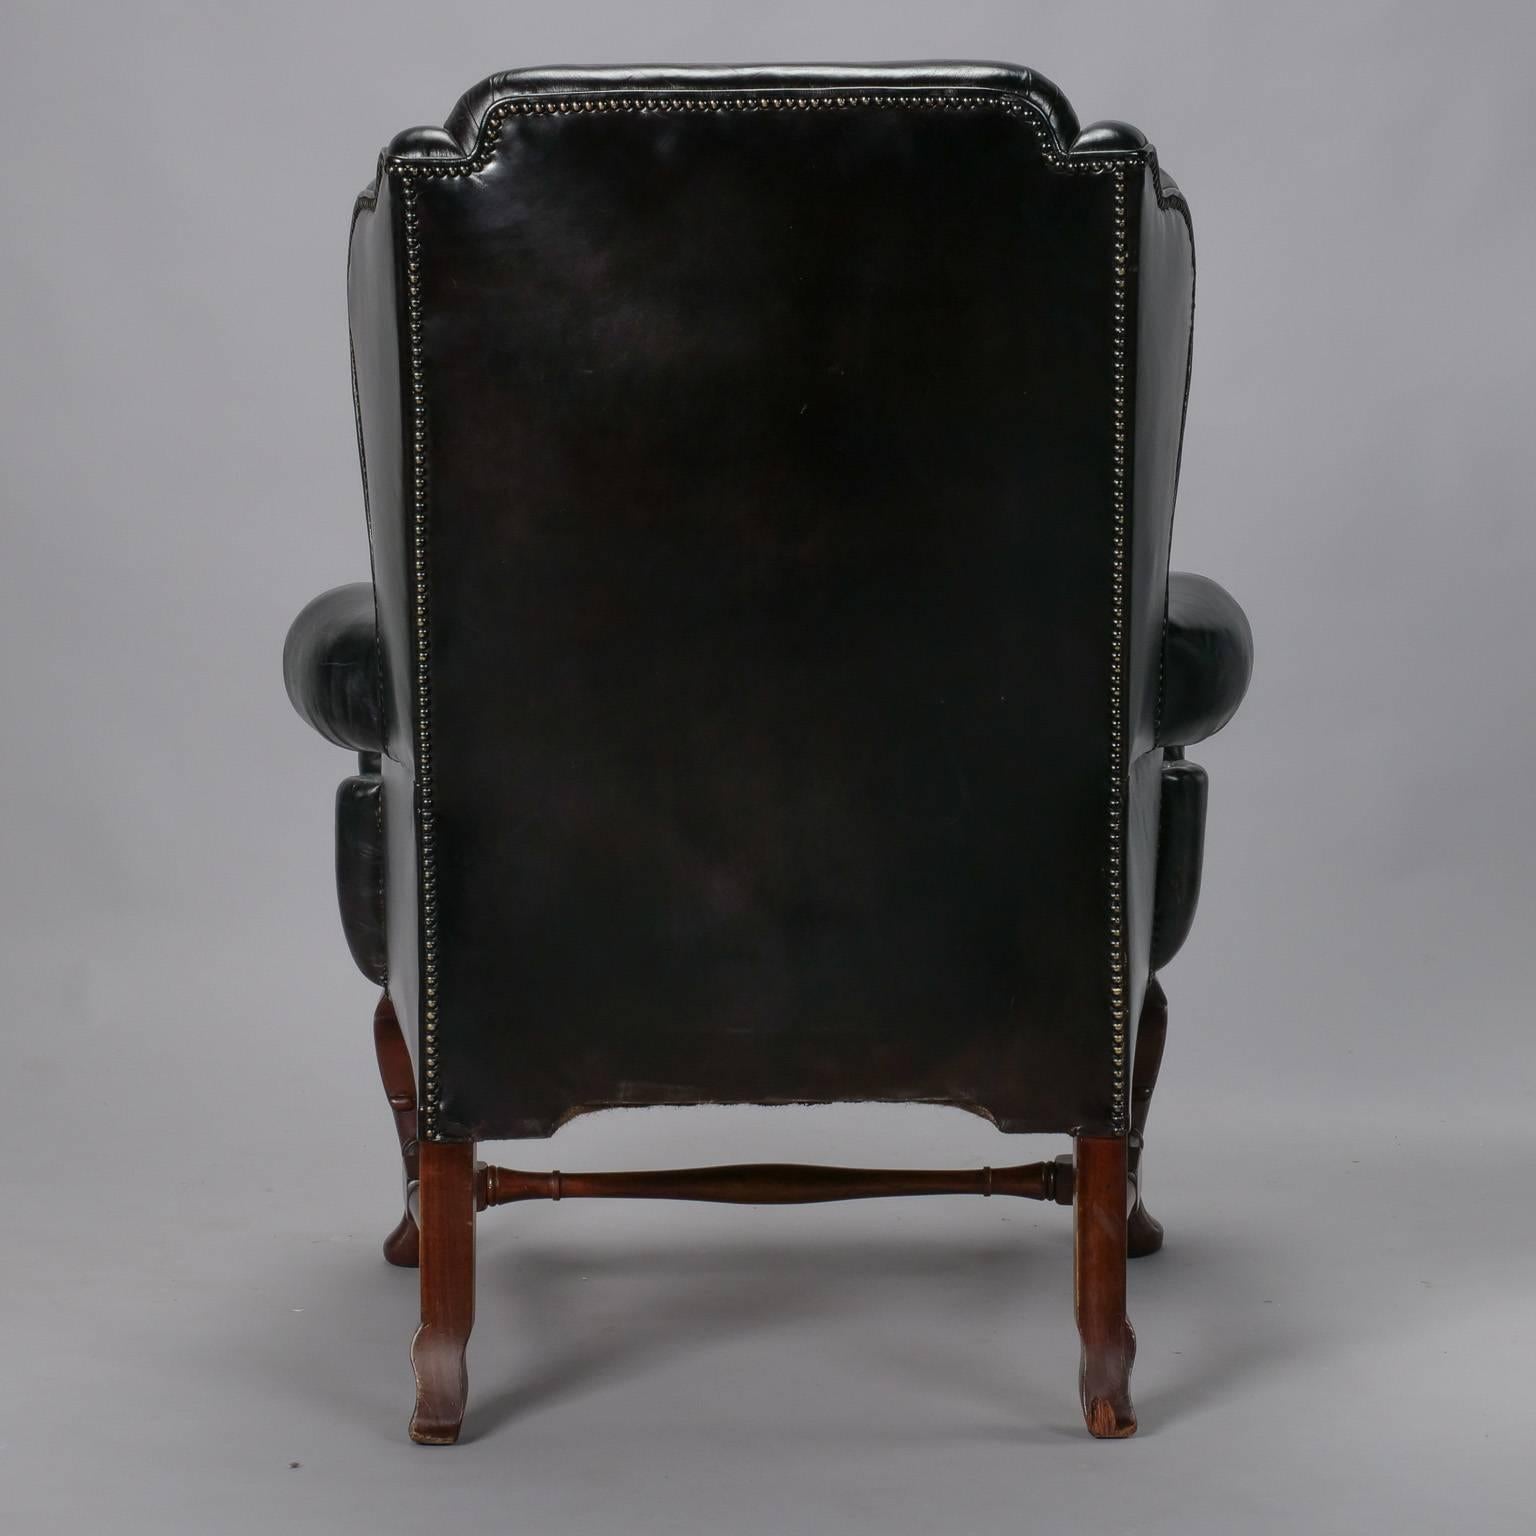 Traditional English wing chair features generous proportions, black leather upholstery with brass nailhead trim, high back, rolled arms and dark wood legs and stretcher, circa 1940s.
 